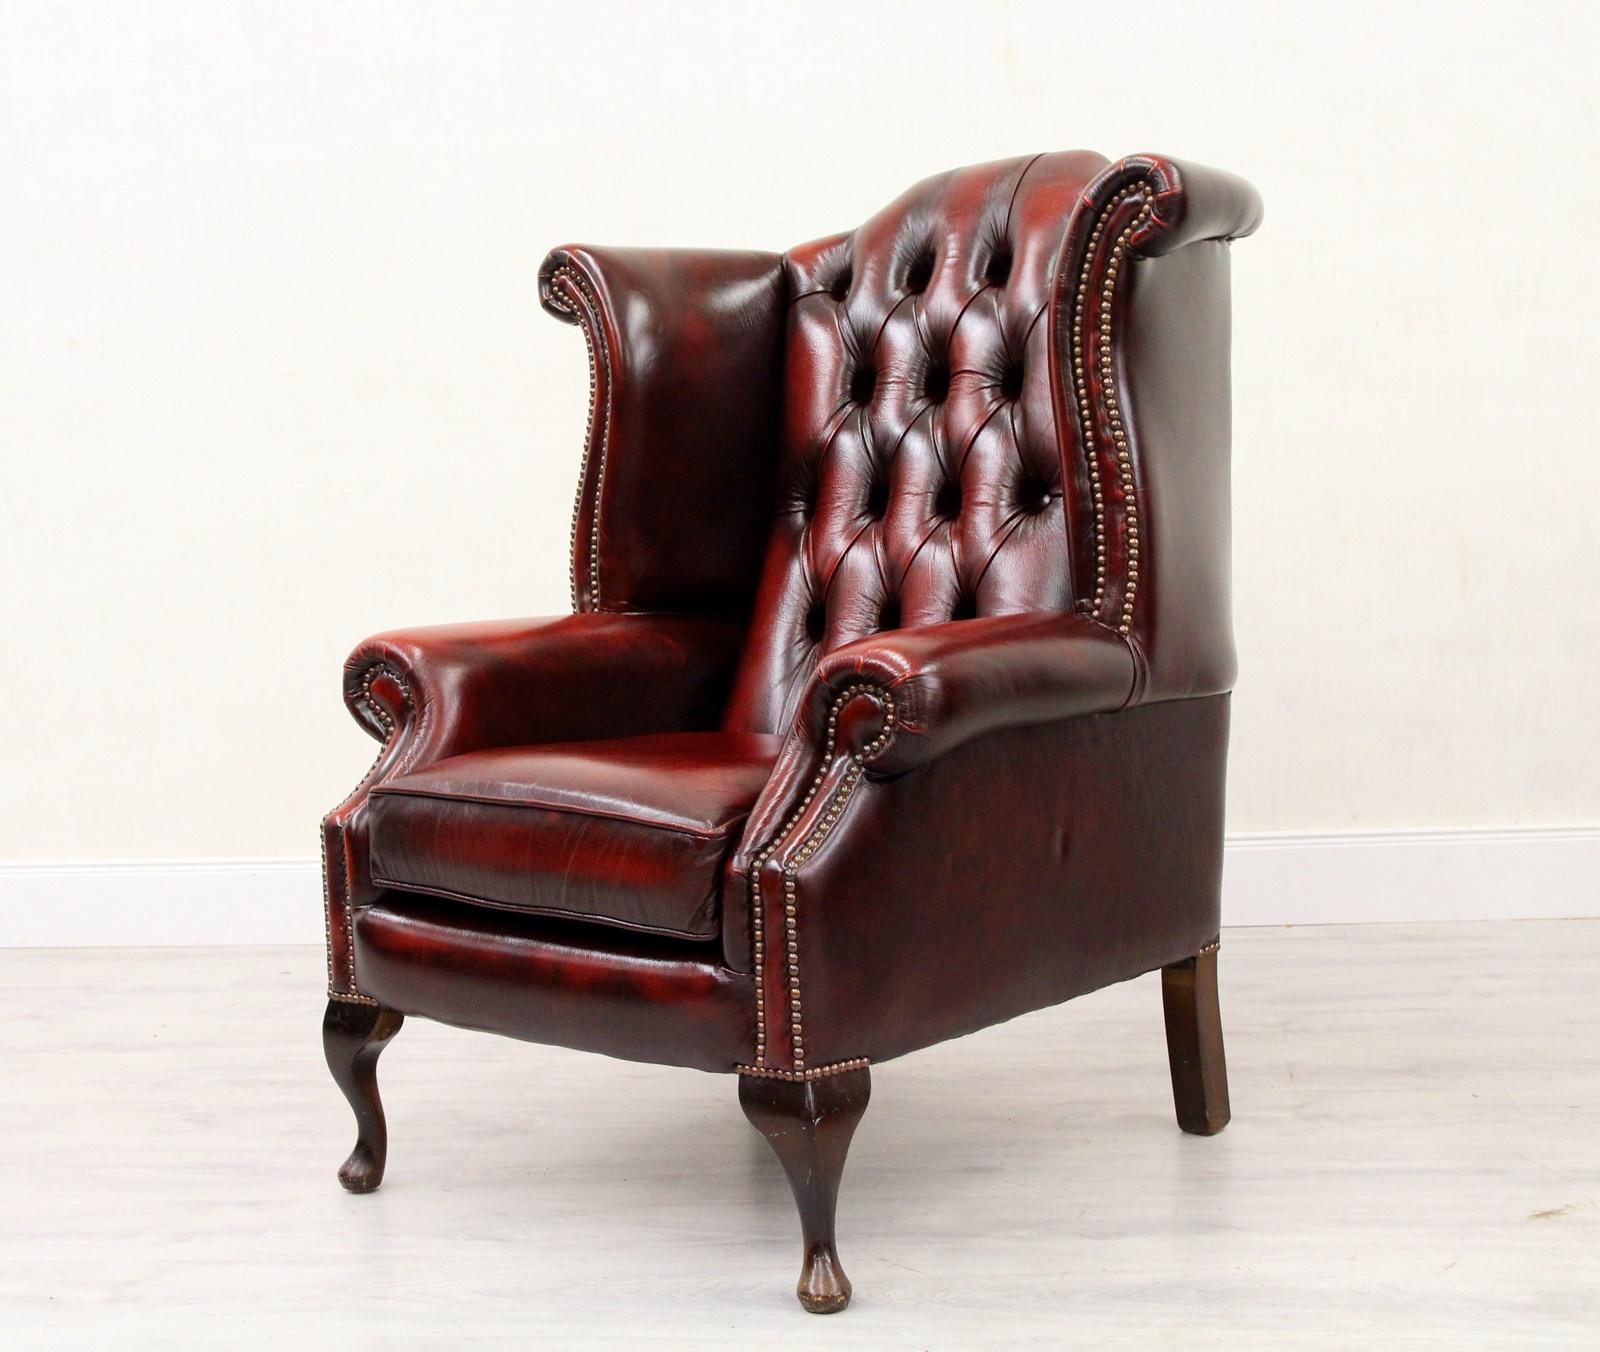 Late 20th Century Chesterfield Armchair Leather Antique Wing Chair Recliner Armchair For Sale